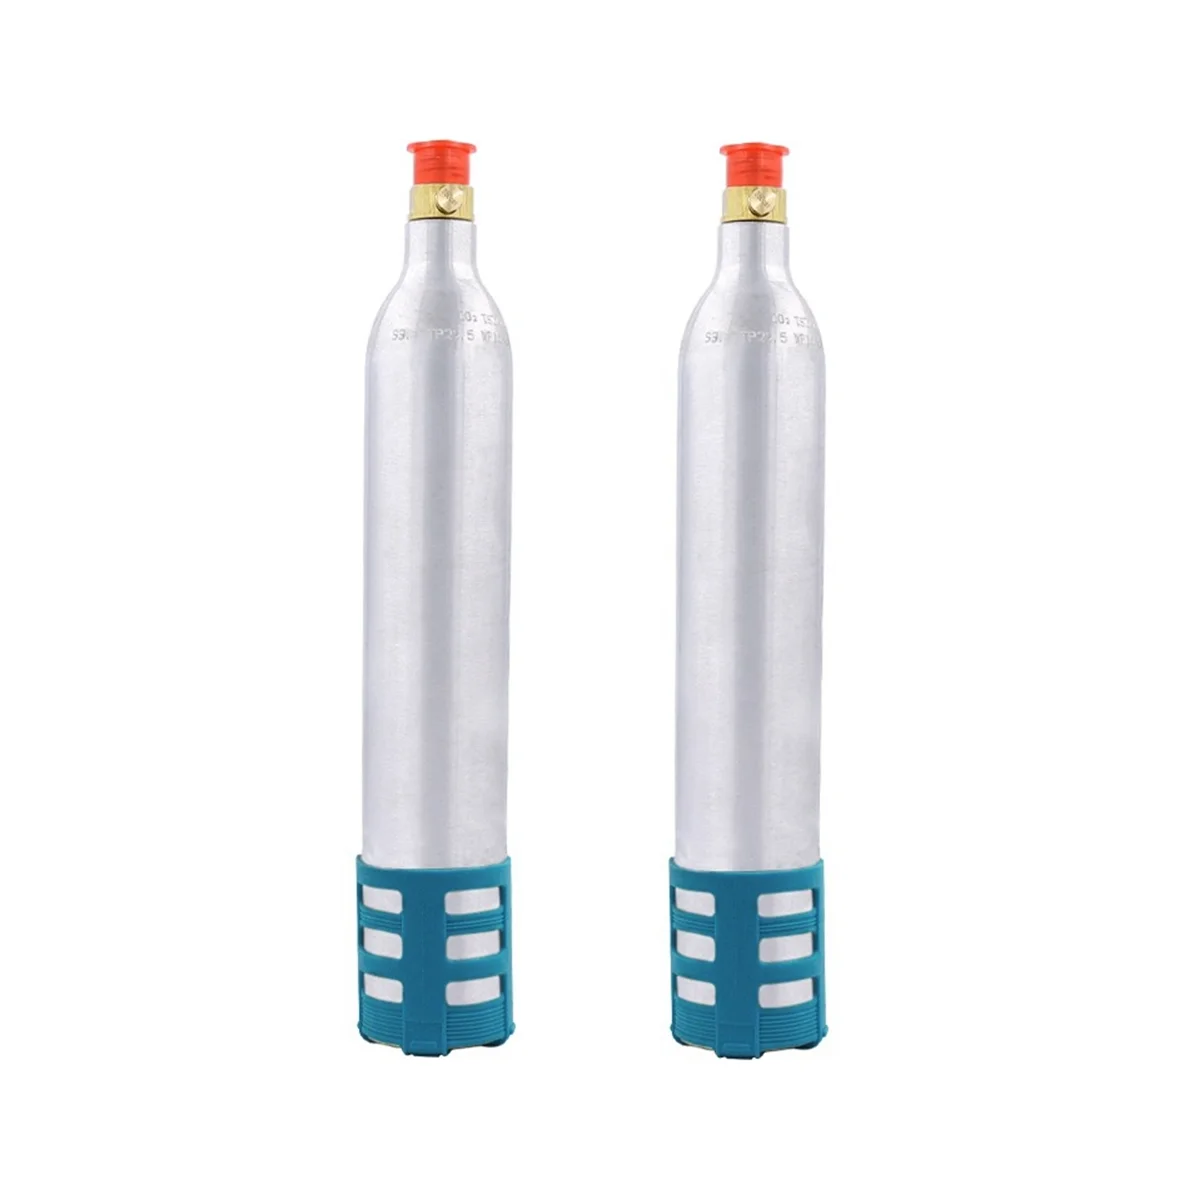 

2PCS 0.6L Soda Maker Refillable Soda Spare Reusable CO2 Cylinder Accessory for Soda Machines,Blue+Silver